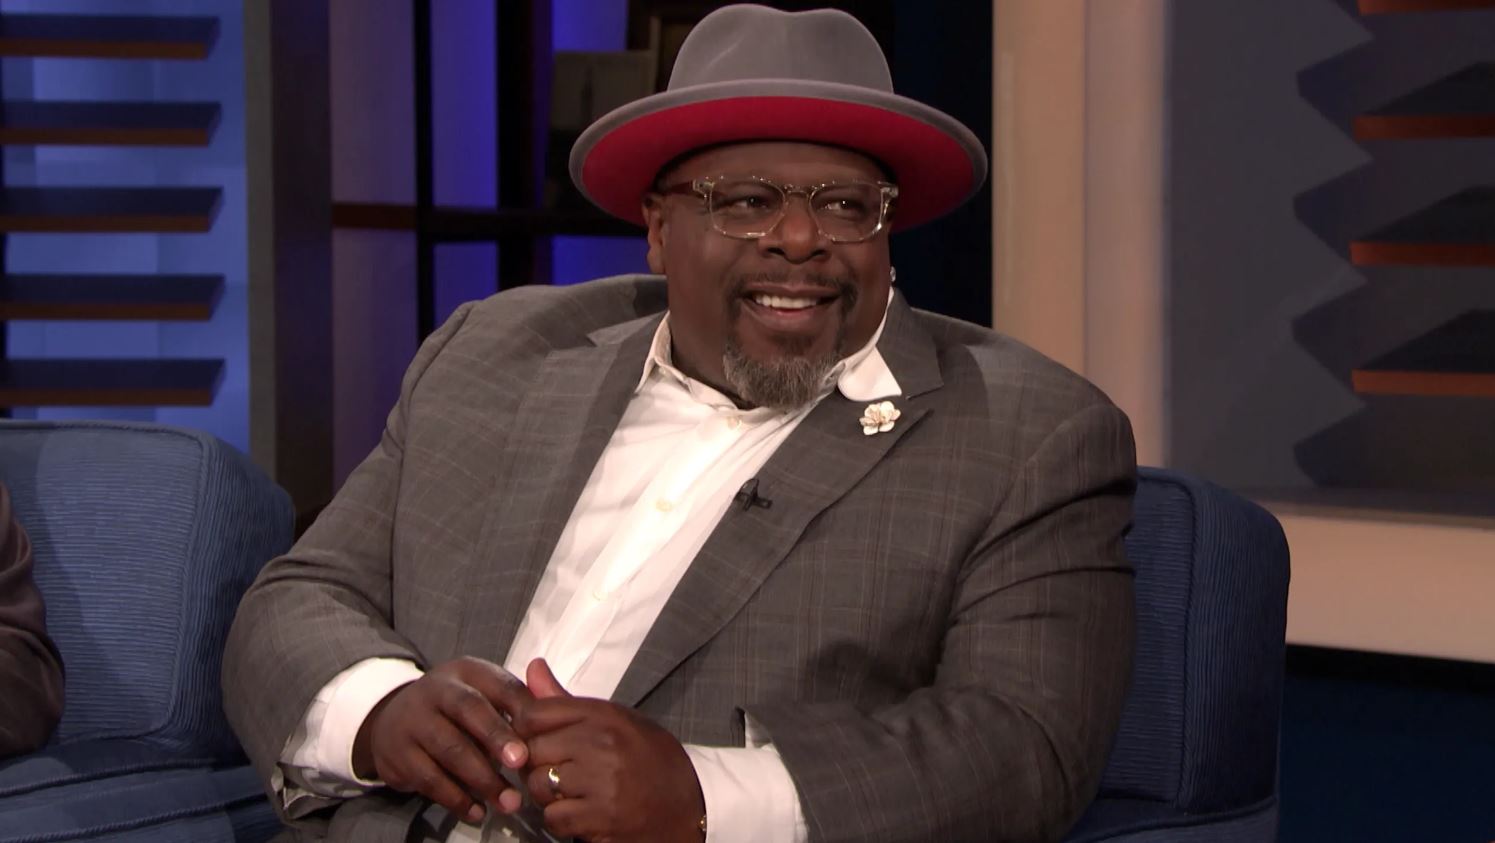 Who is Cedric the Entertainer Married To?